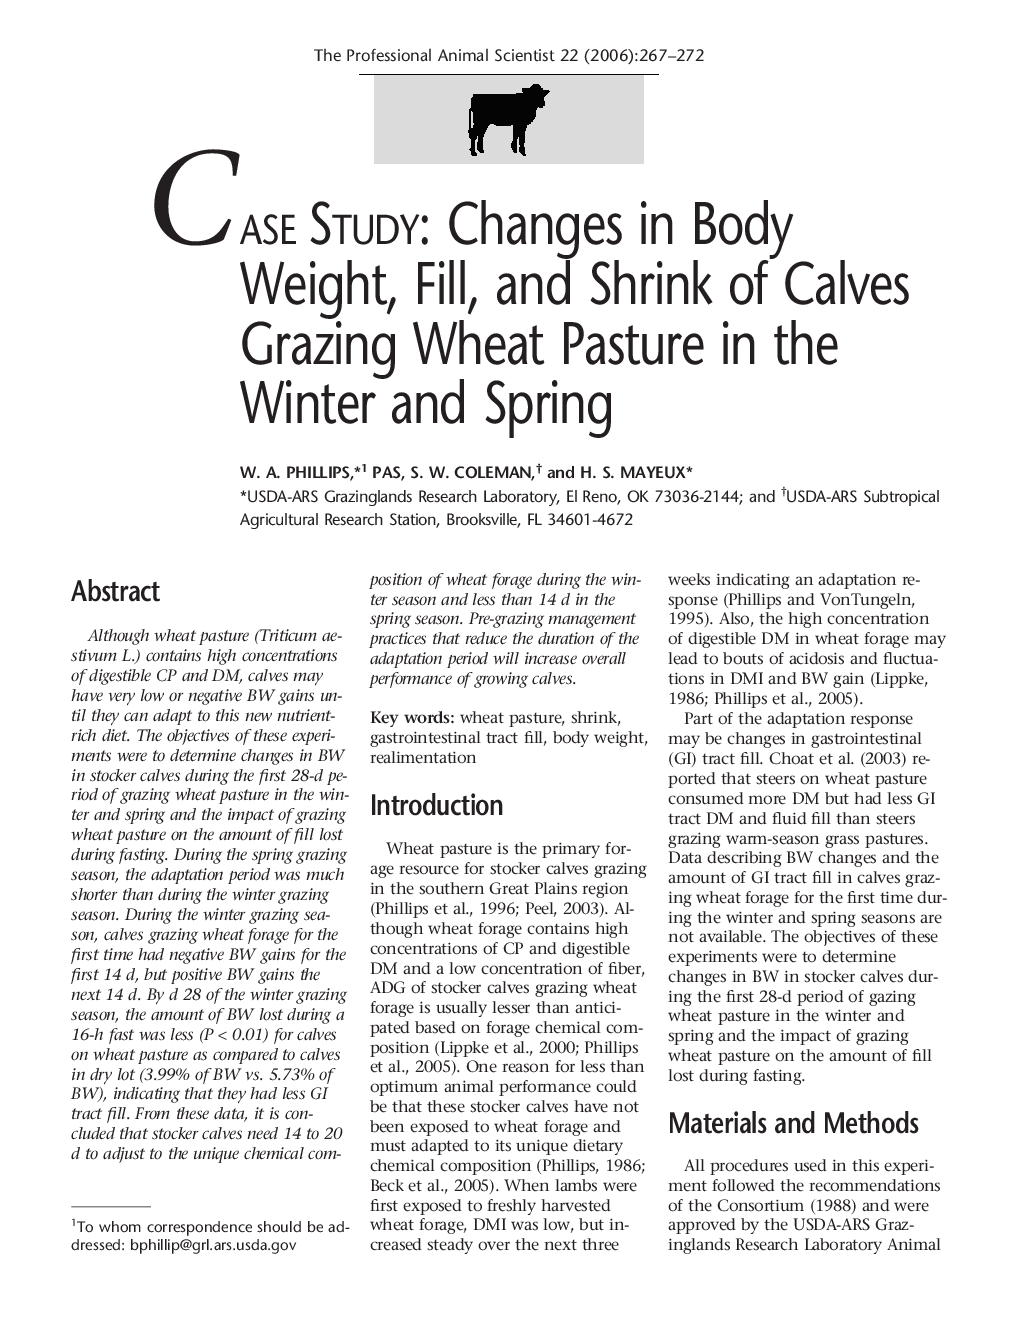 Changes in Body Weight, Fill, and Shrink of Calves Grazing Wheat Pasture in the Winter and Spring